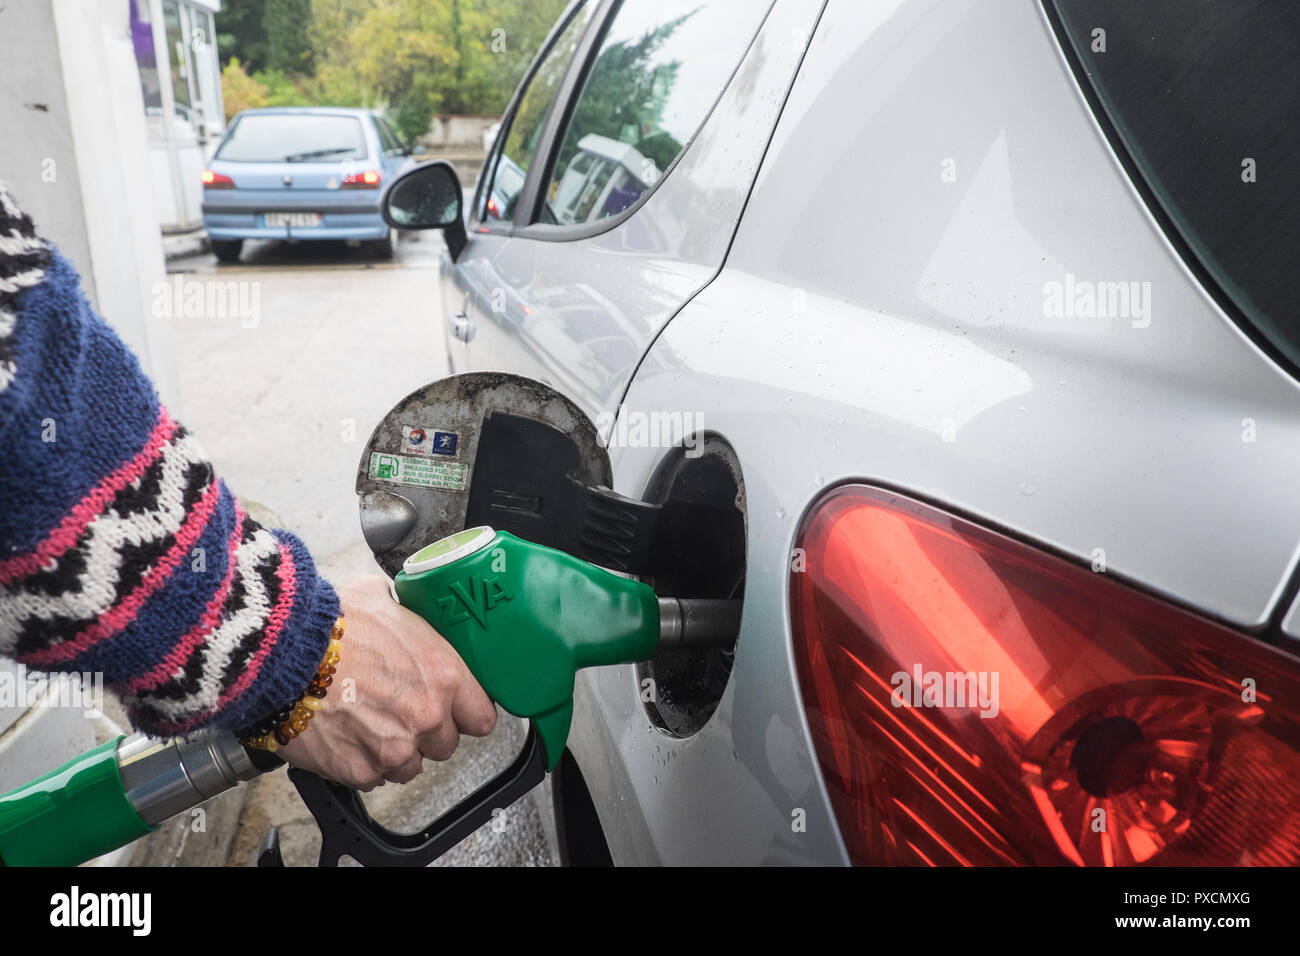 Putting,petrol,diesel,gasoline,self,service,into,Peugeot,car,at,petrol,gas,station,garage,in,Limoux,Aude,department,South,of, France,Europe,European, Stock Photo